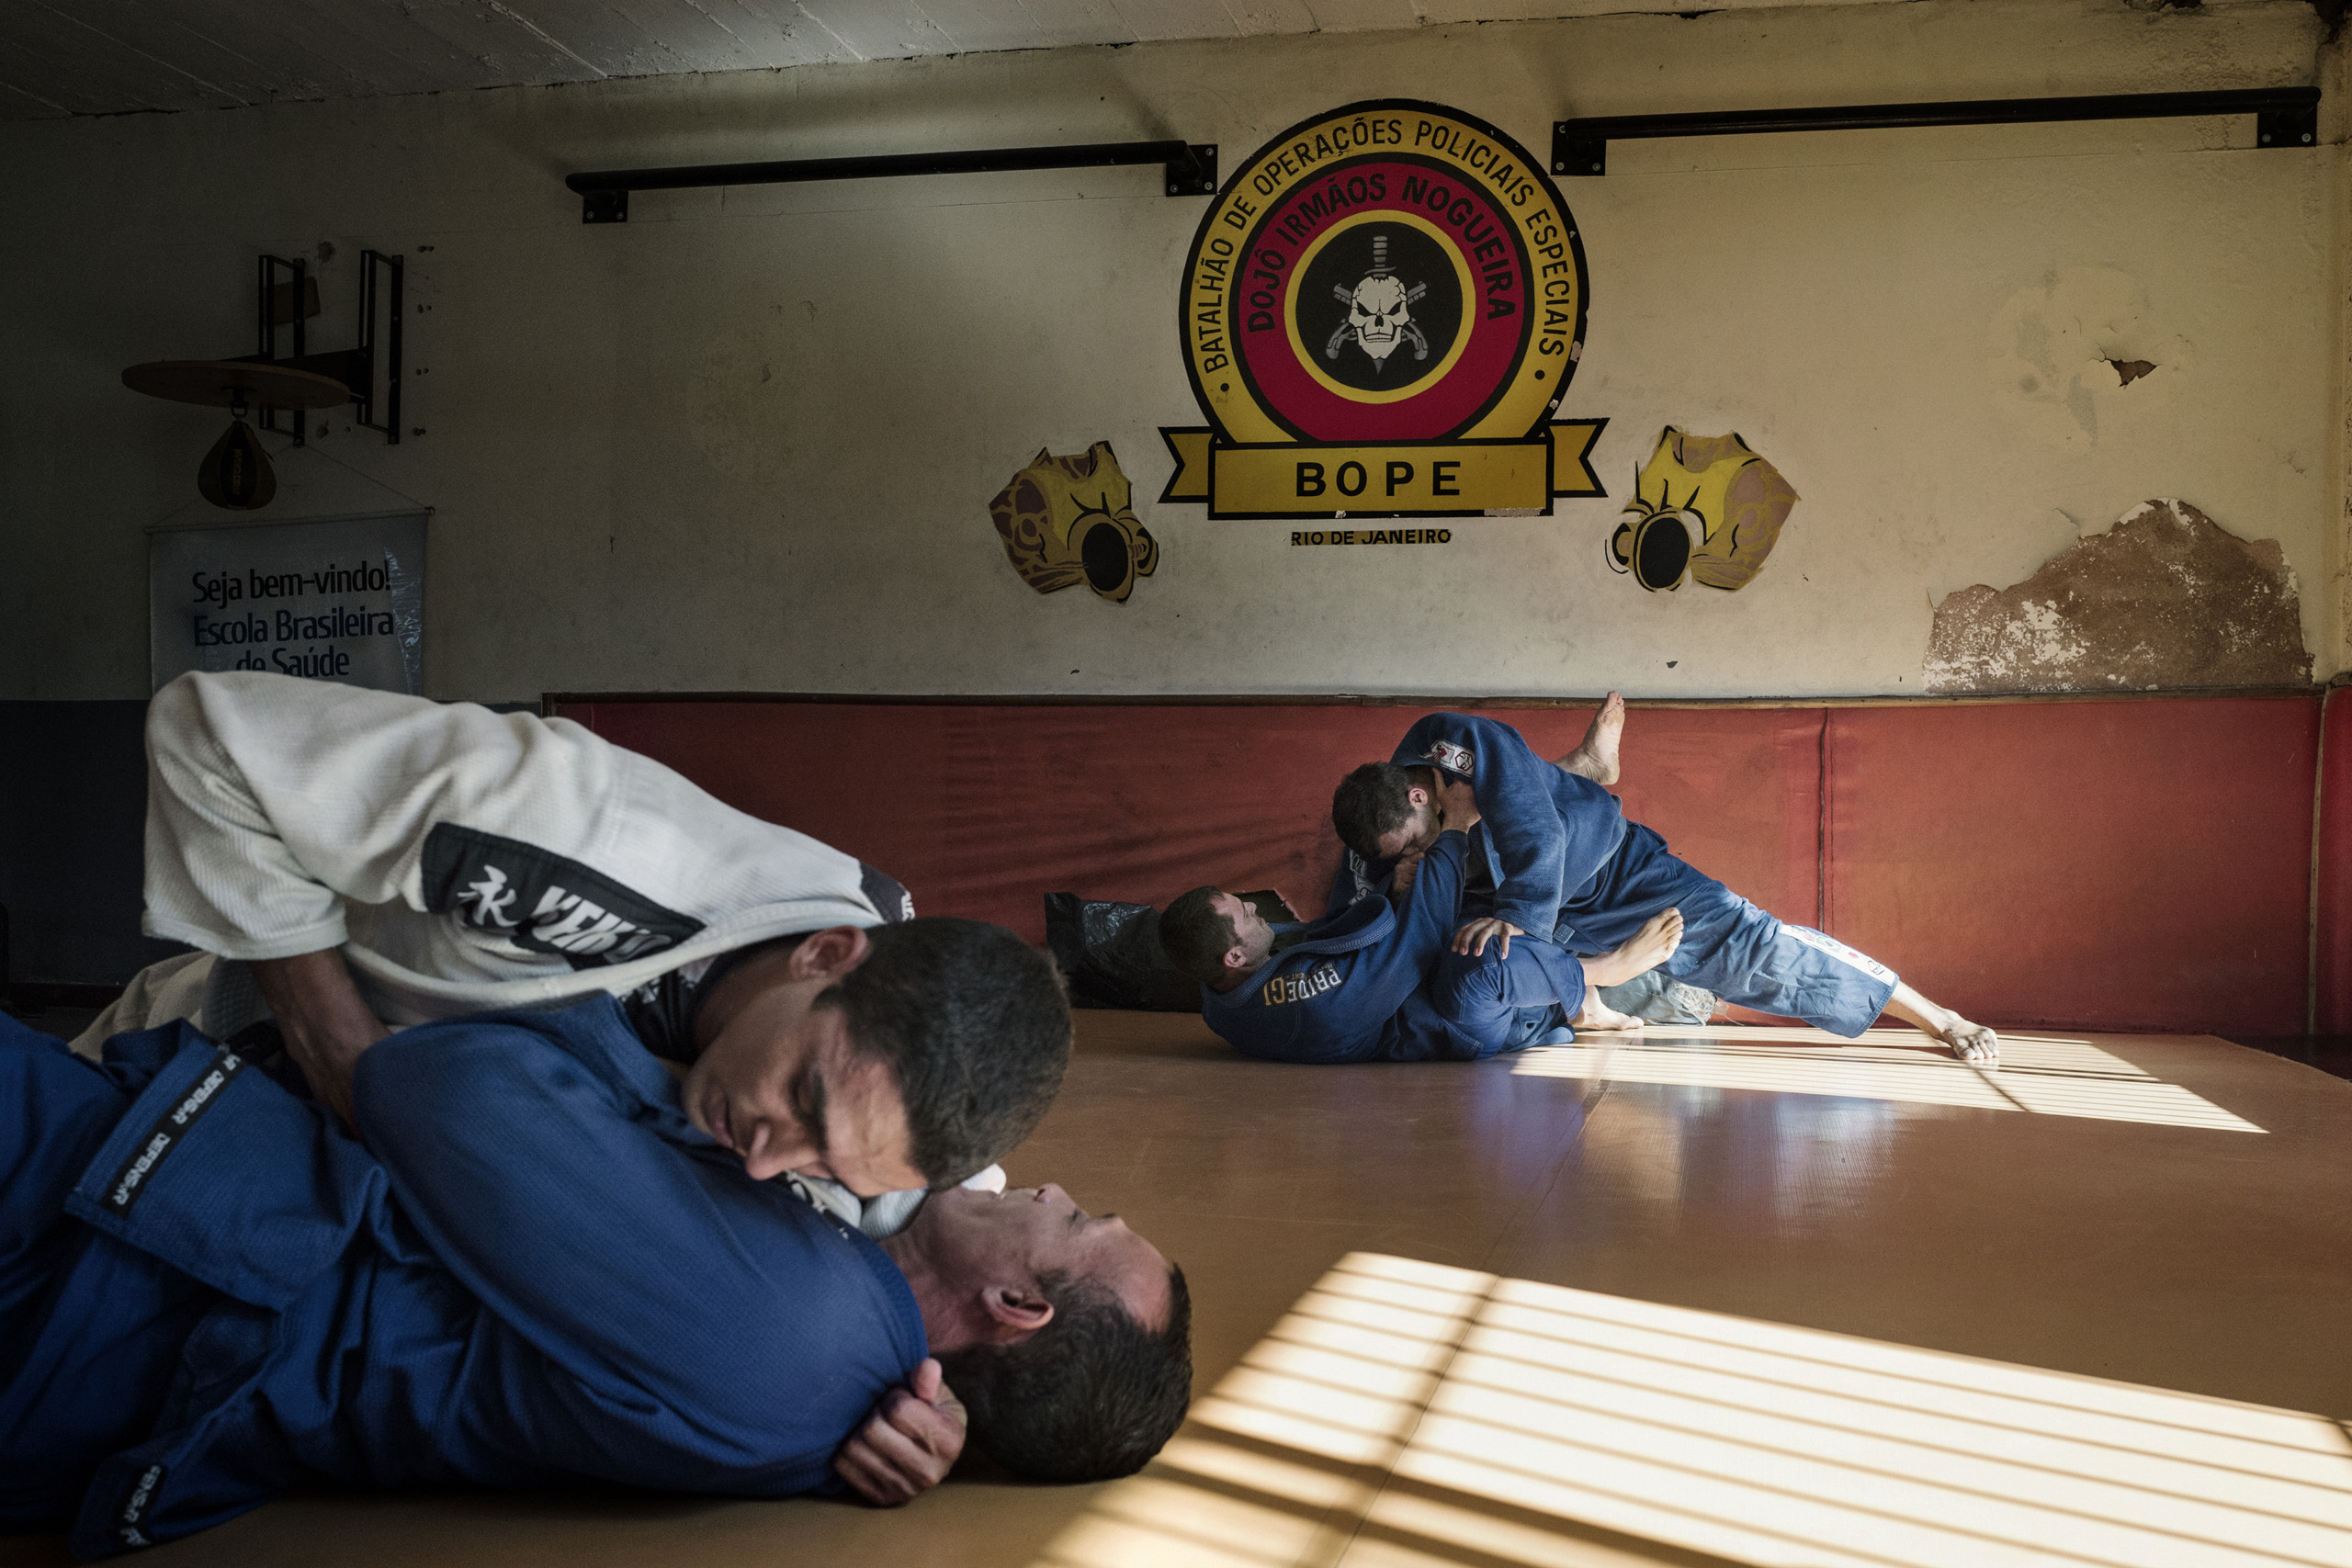 Training in Brazilian Jiu-Jitsu for the members of BOPE (Battalion of Special Police Operations).